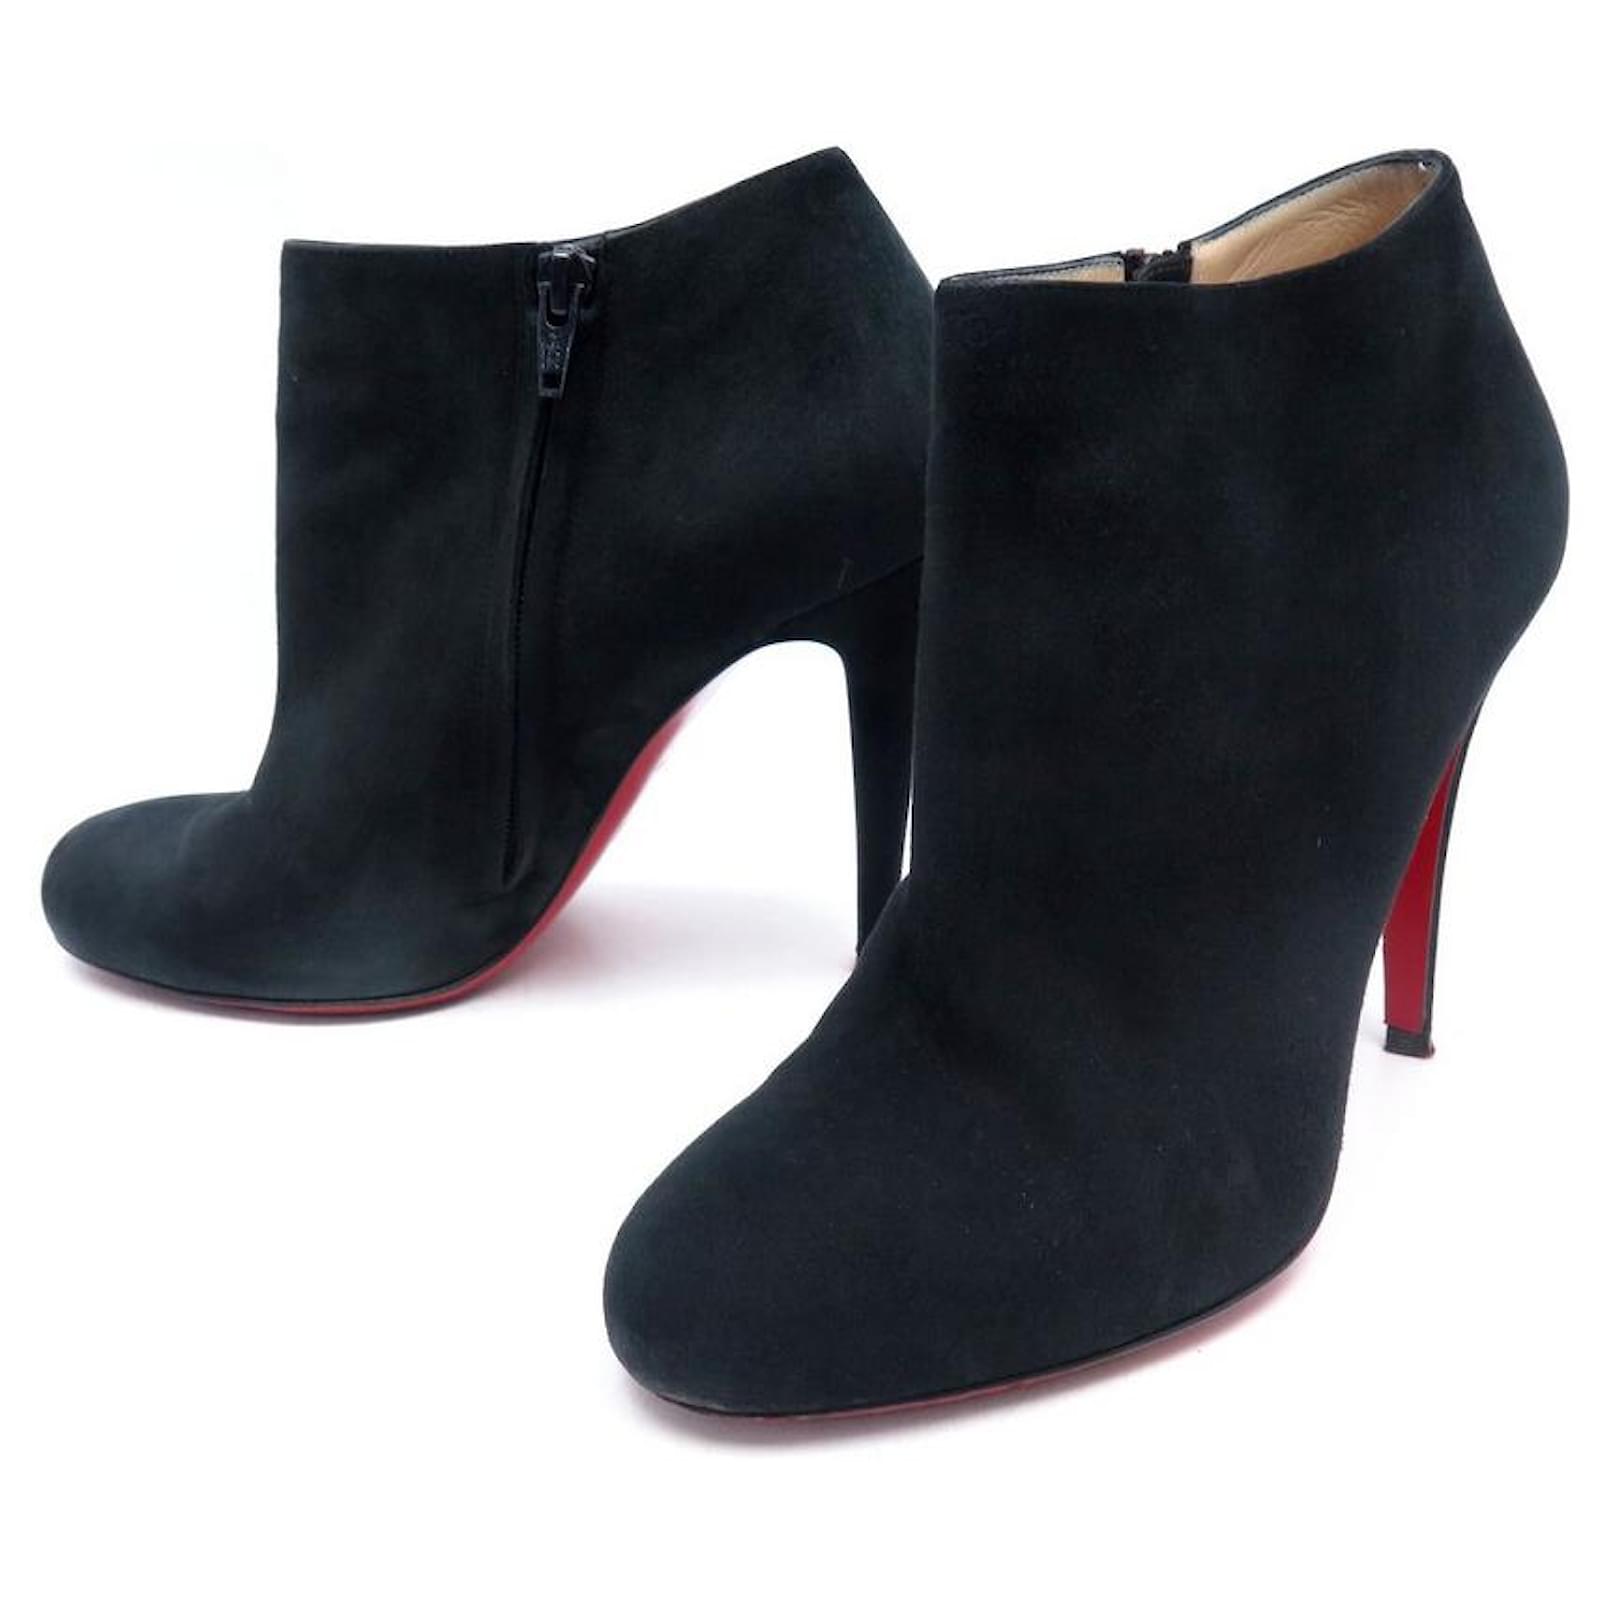 CHRISTIAN BELLE SHOES 39 WITH HEELS BLACK SUEDE BOOTS - Joli Closet